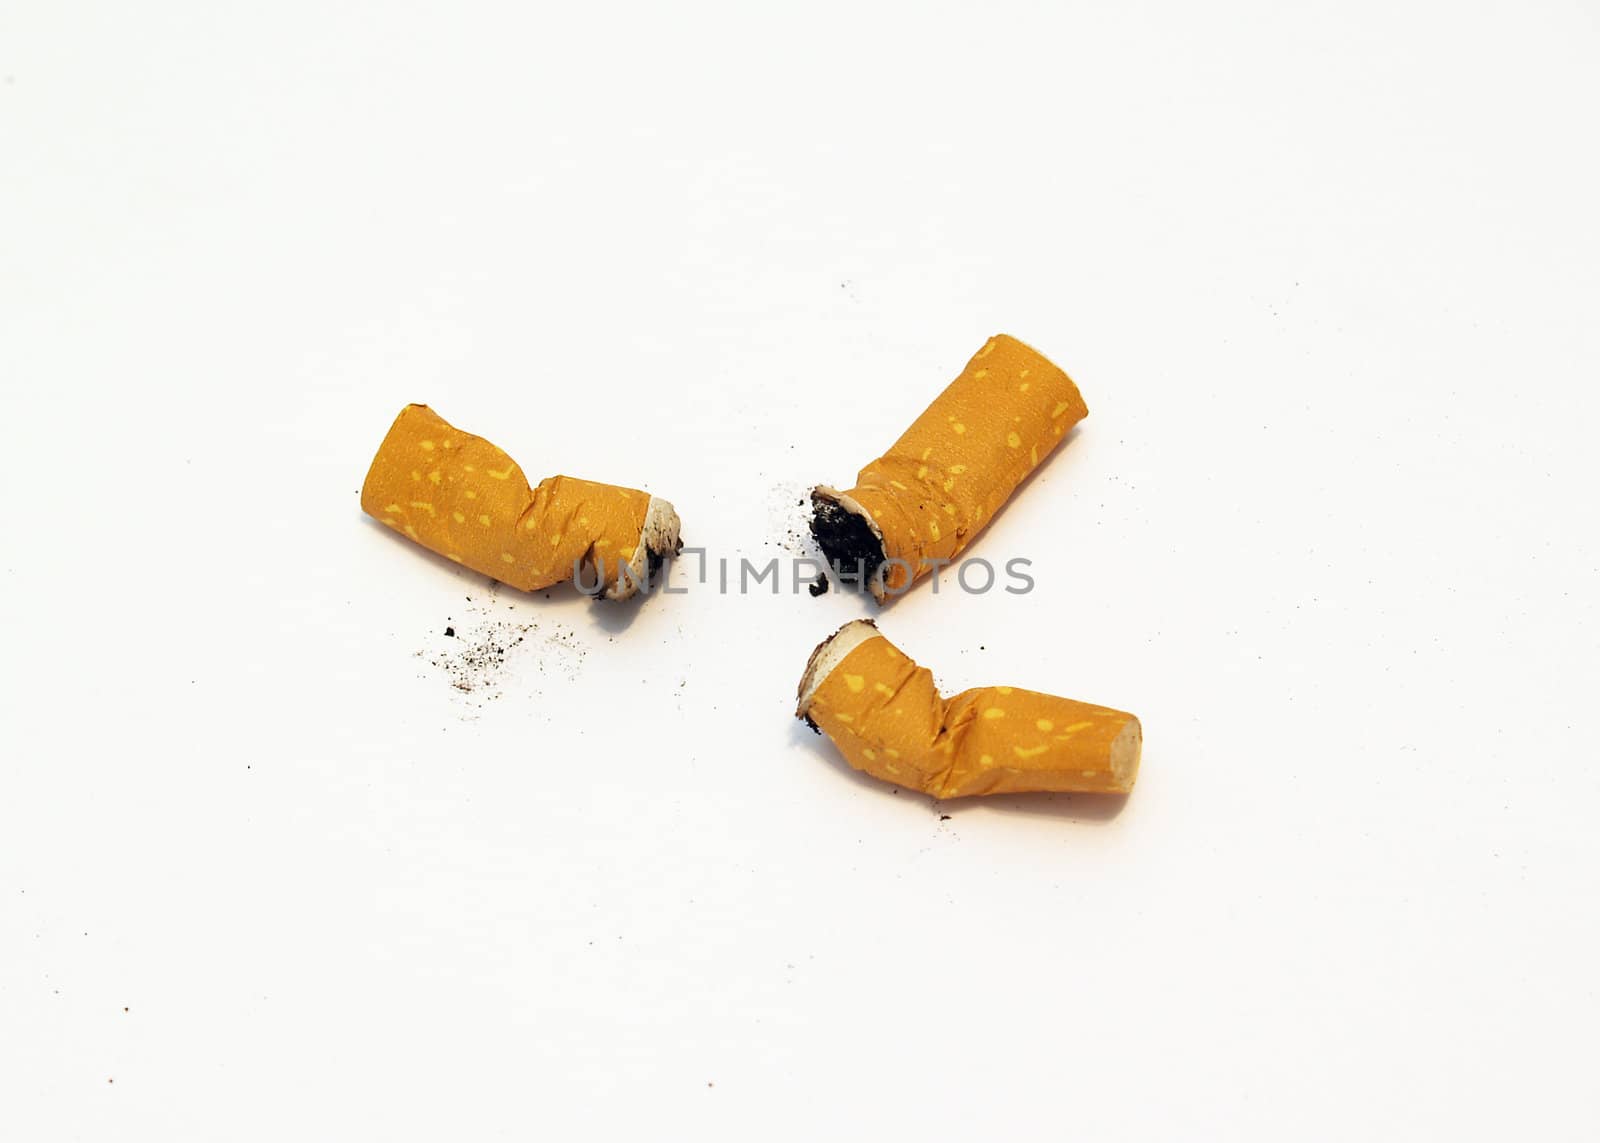 cigarette butts by lauria